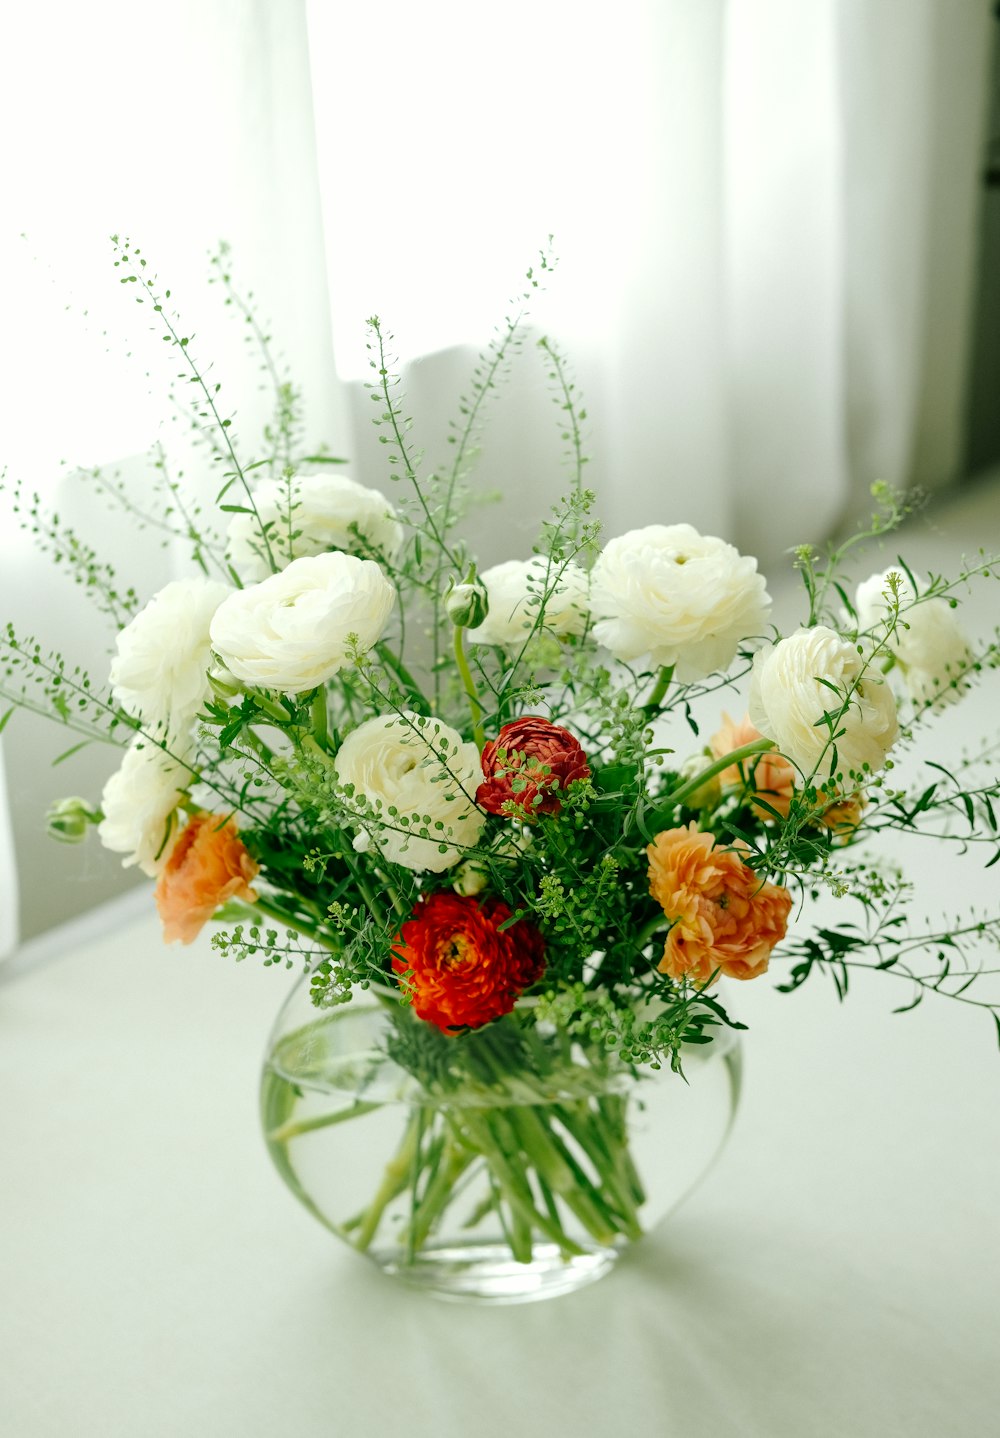 a vase filled with lots of white and orange flowers